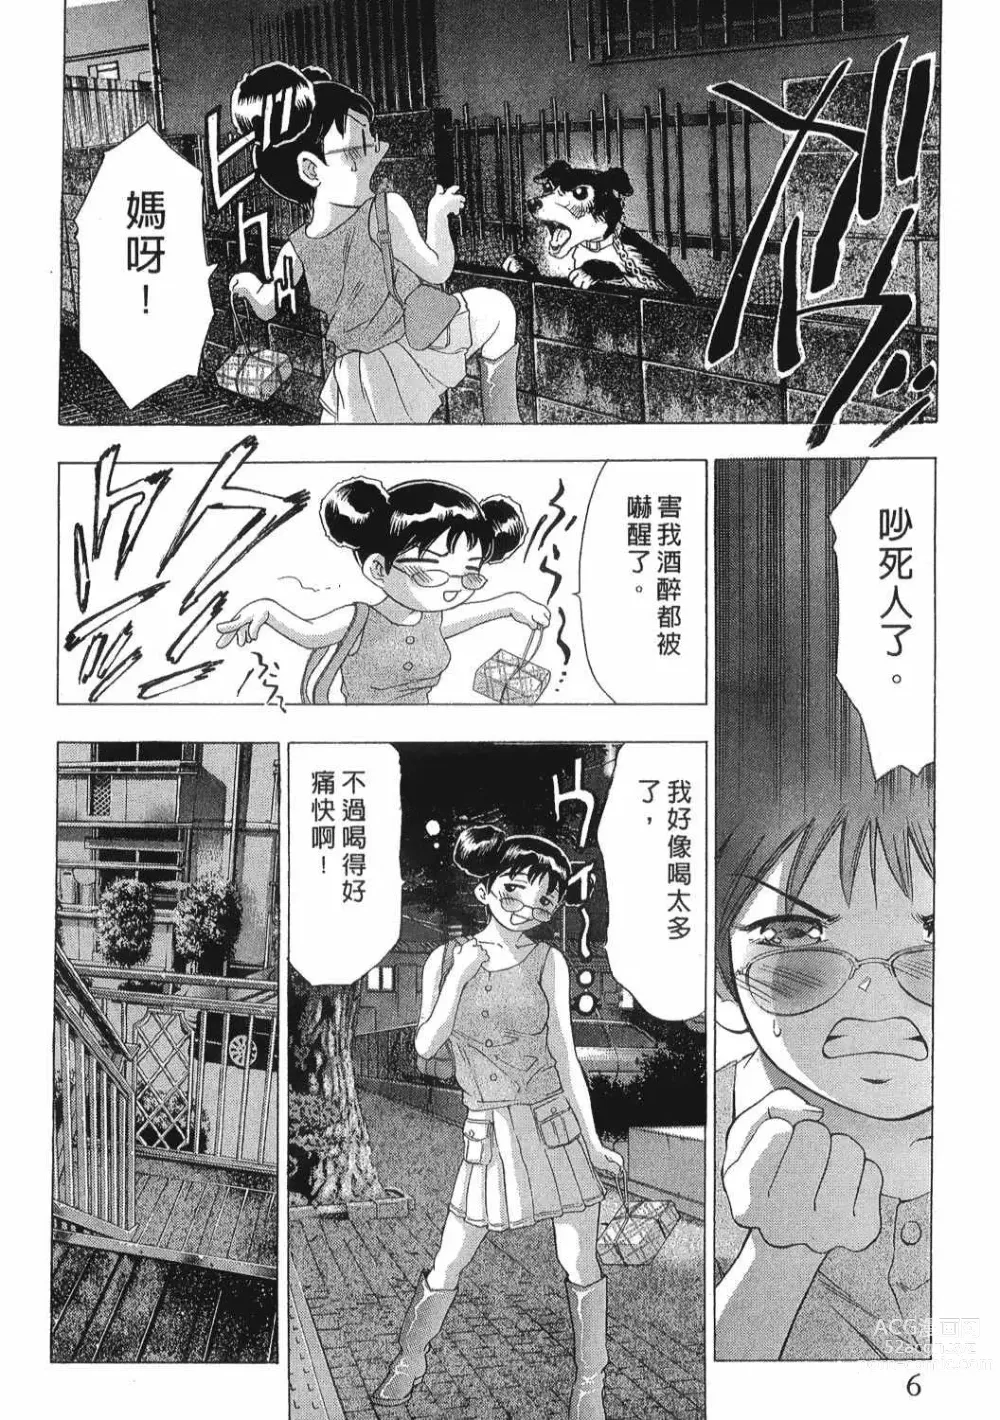 Page 5 of manga Mehyou - Female Panther Vol. 8